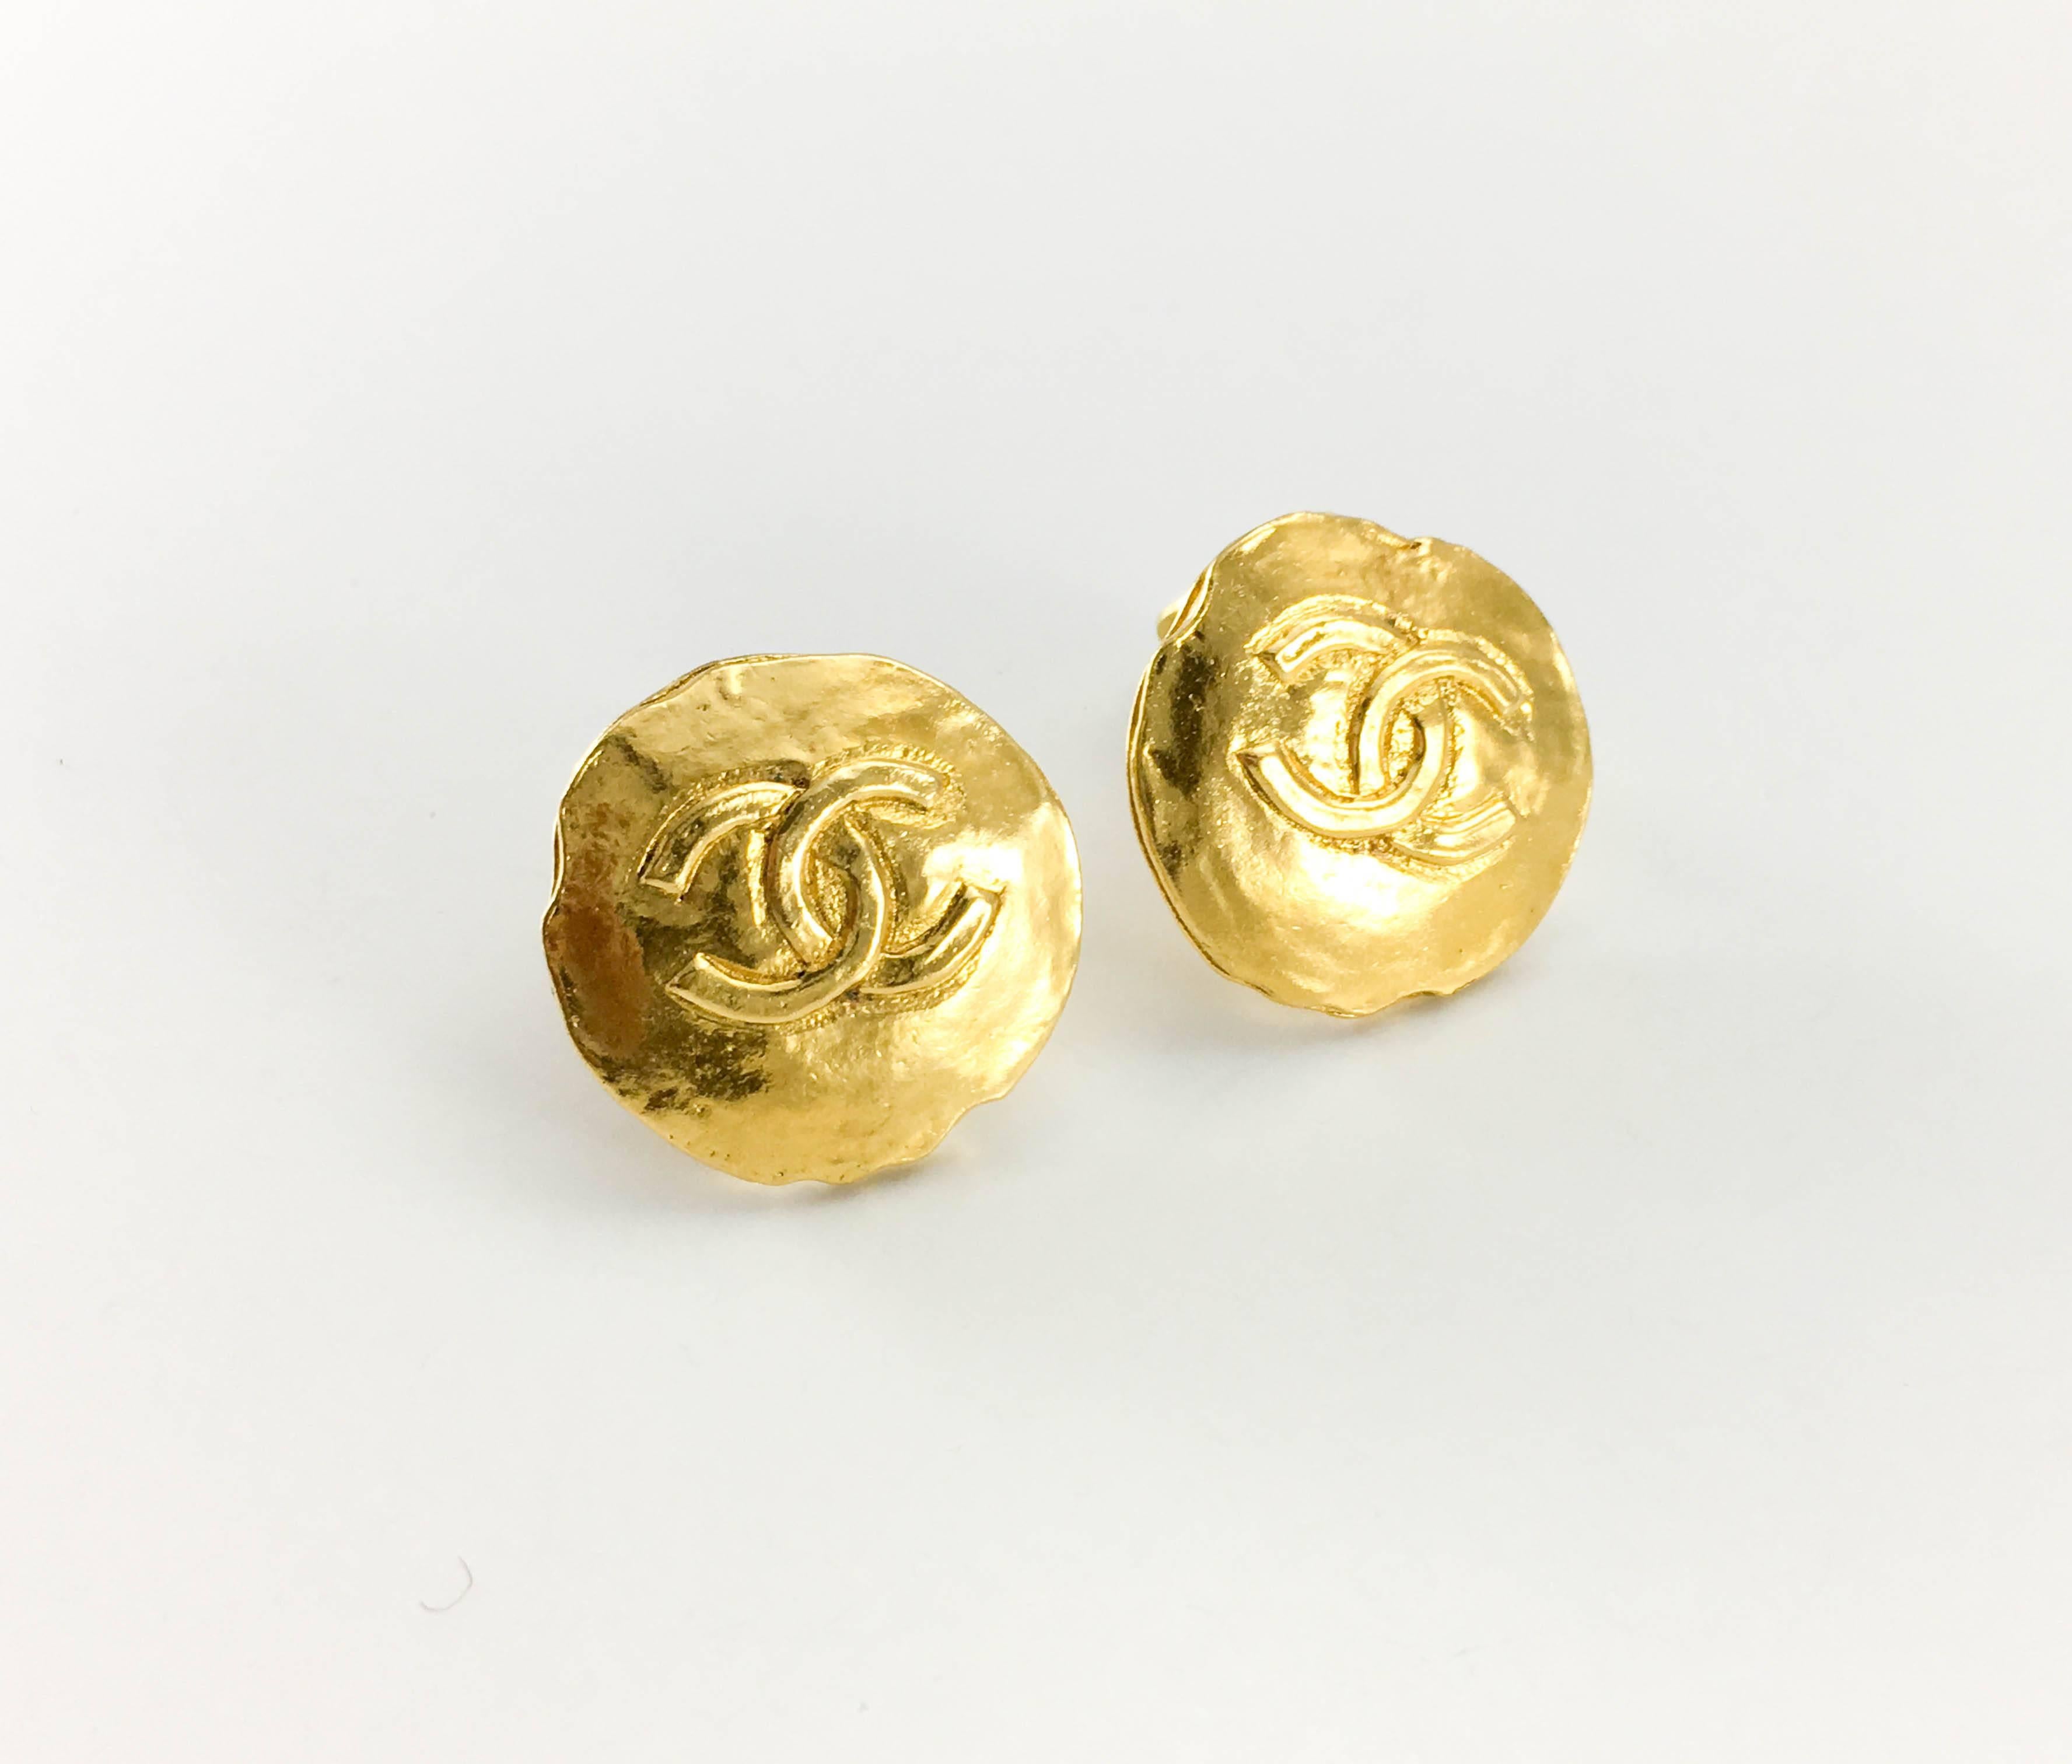 Vintage Gold-Plated Logo Coin Clip-On Earrings. These stylish earrings by Chanel date back from the 1970’s. Made in gold-plated metal, it is shaped as an uneven coin bearing the iconic Chanel ‘CC’ logo. Chanel signed on the back. They come in a